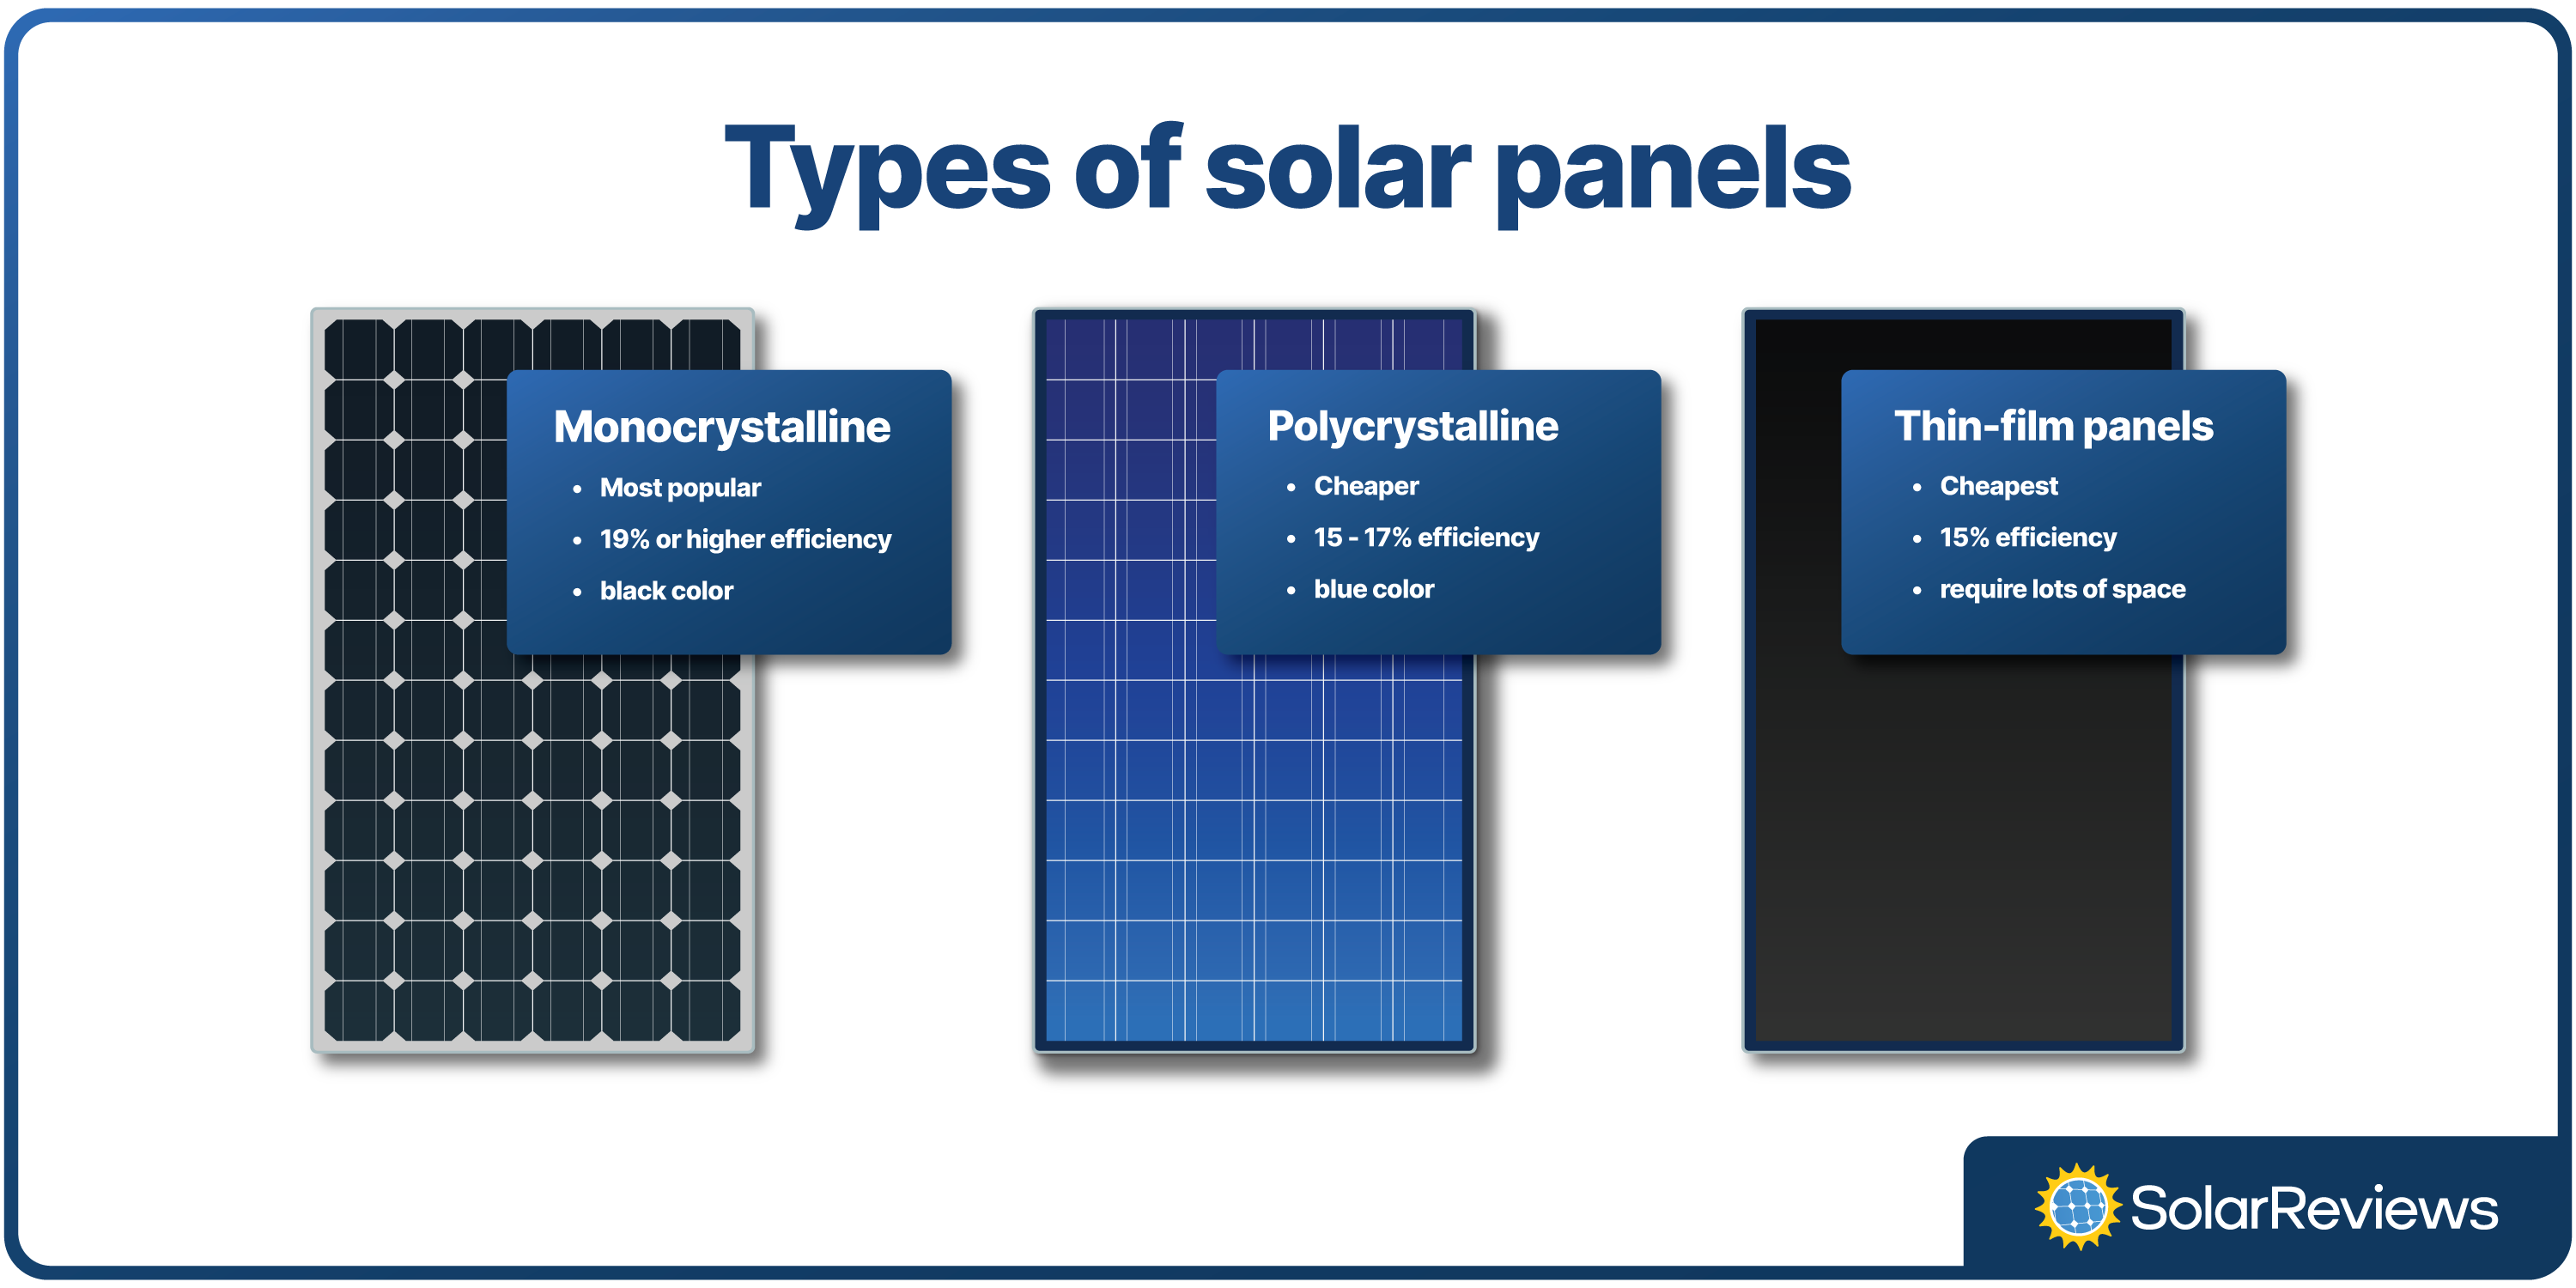 1. Monocrystalline solar panels are the most popular and efficient solar panels. They are black in color and are used in most modern residential solar installations. 2. Polycrystalline solar panels are mid-tier in price and performance and have a blue color. 3. Thin-film solar panels are the cheapest option but have the lowest efficiency. Thin-film panels require a lot of space to generate the same electricity as mono or polycrystalline panels.